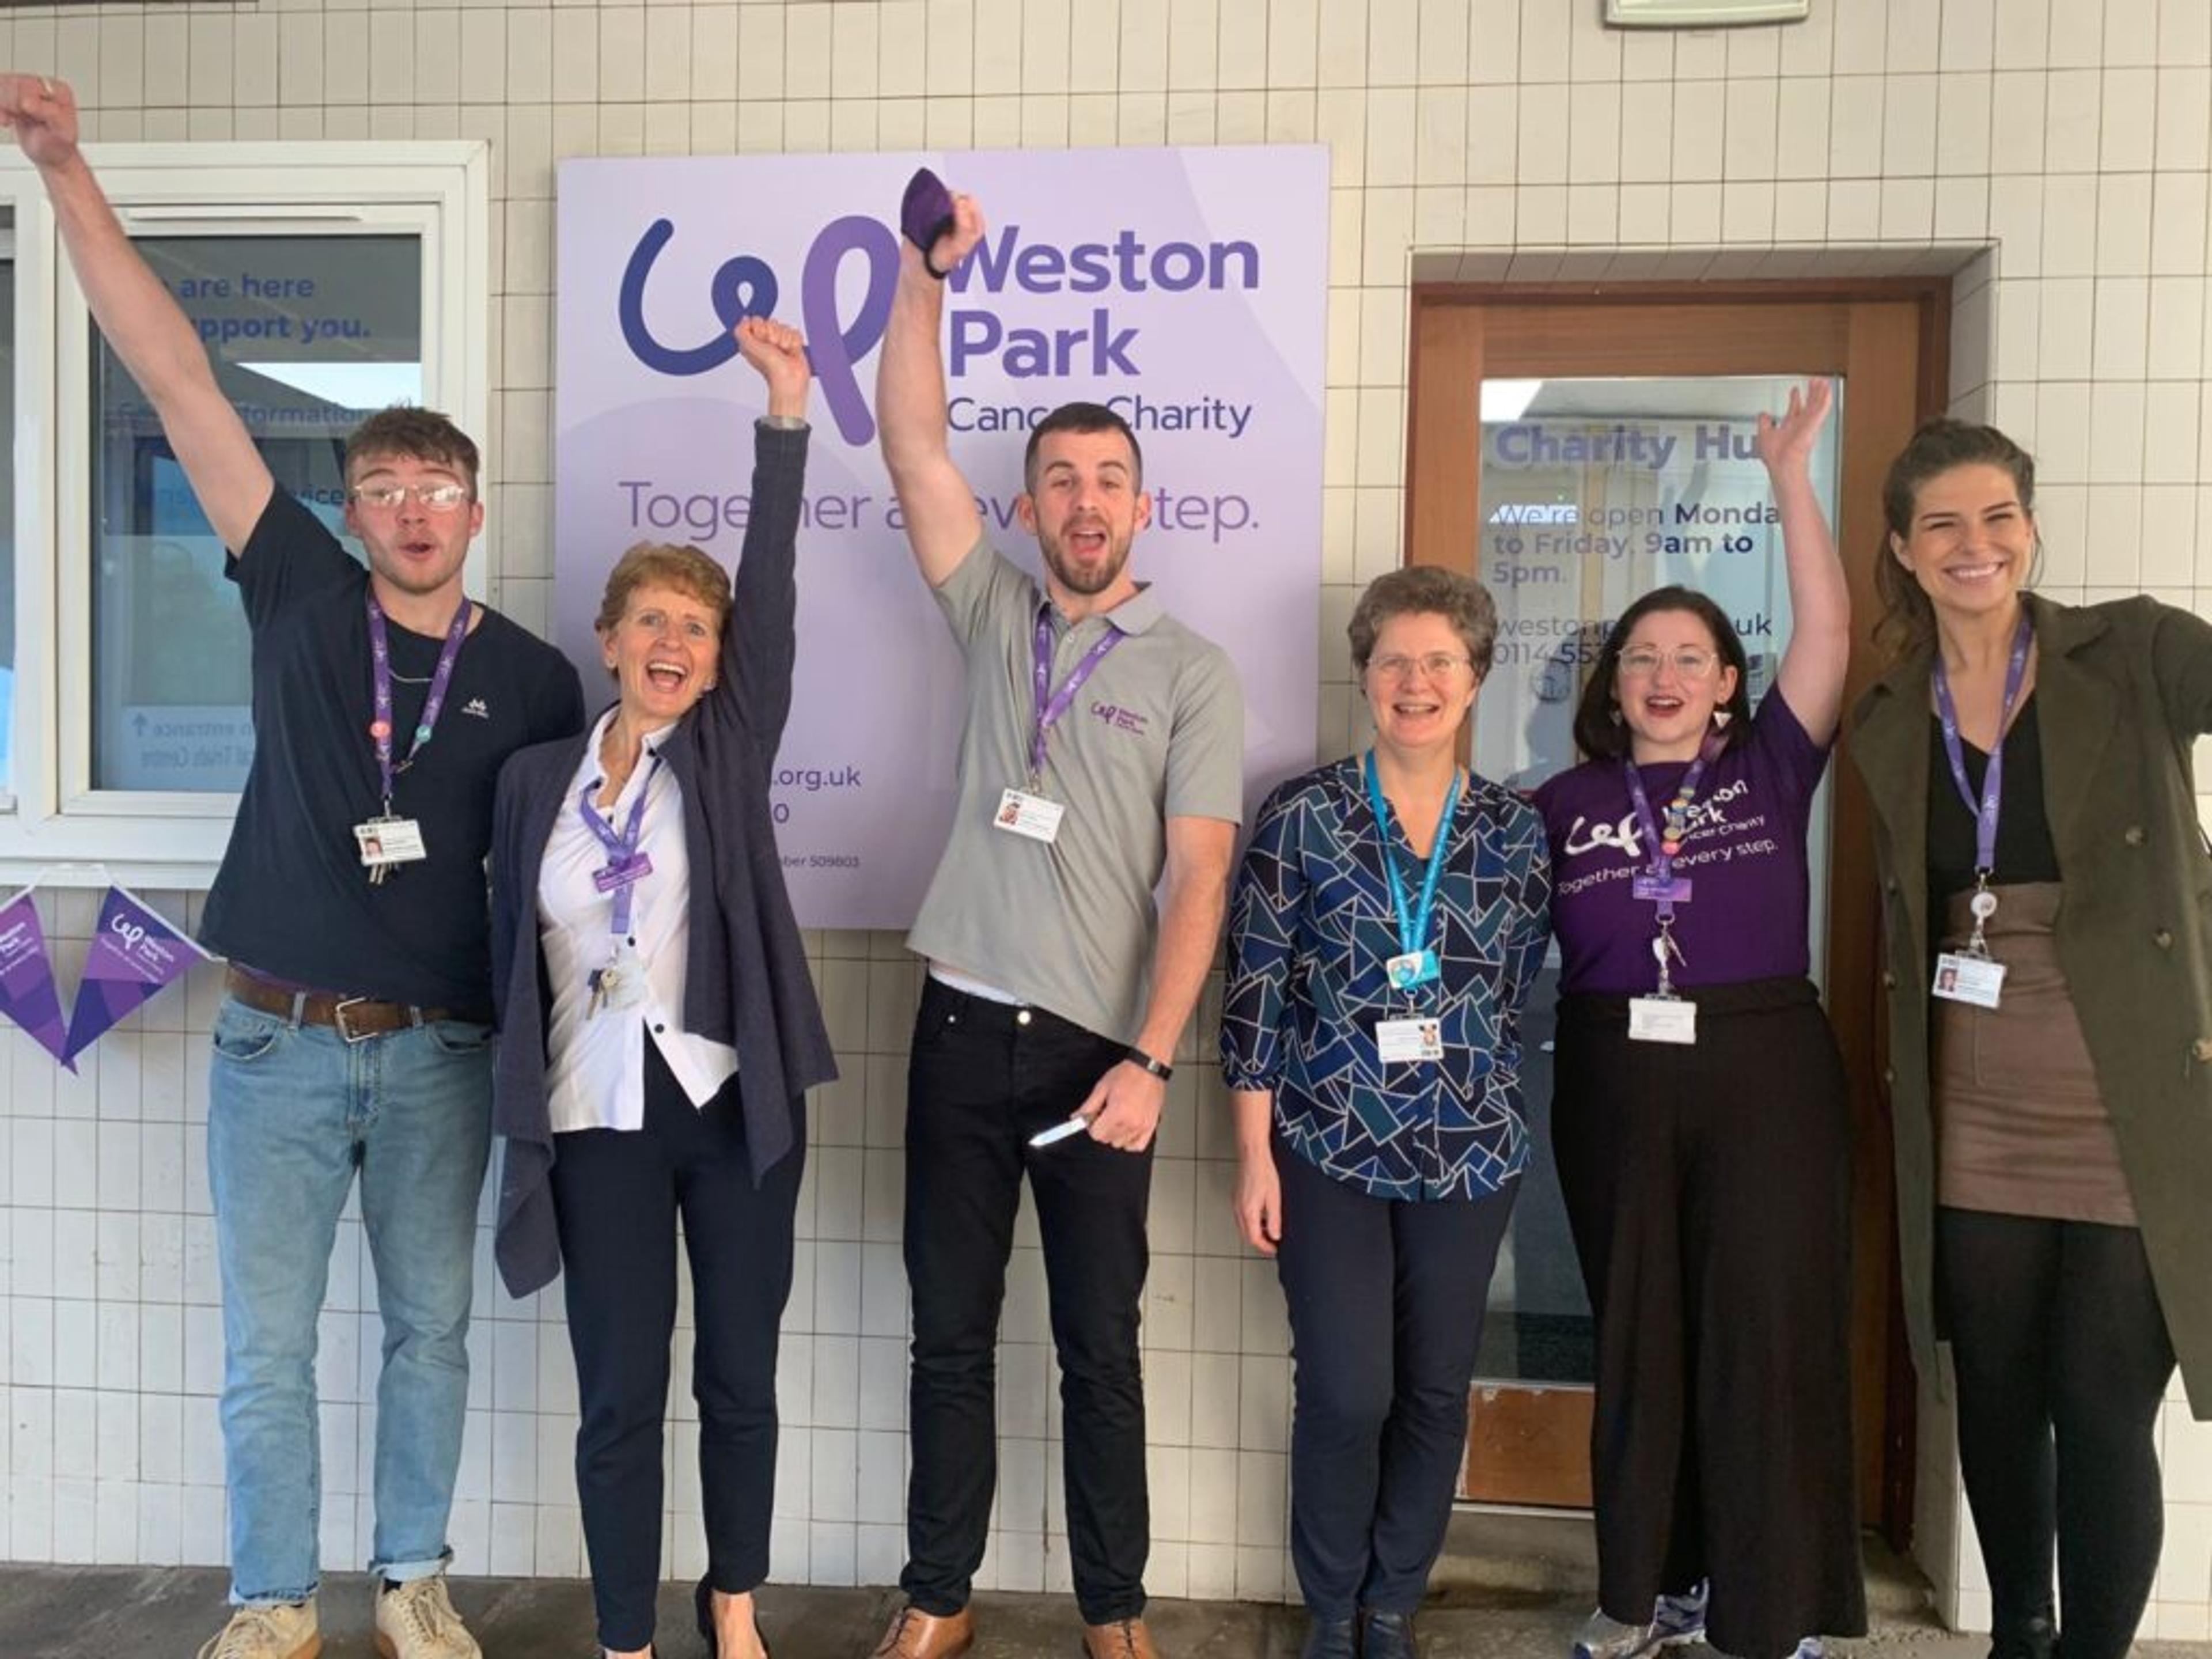 Six members of Weston Park Cancer Charity stood outside an office smiling with their hands in the air.